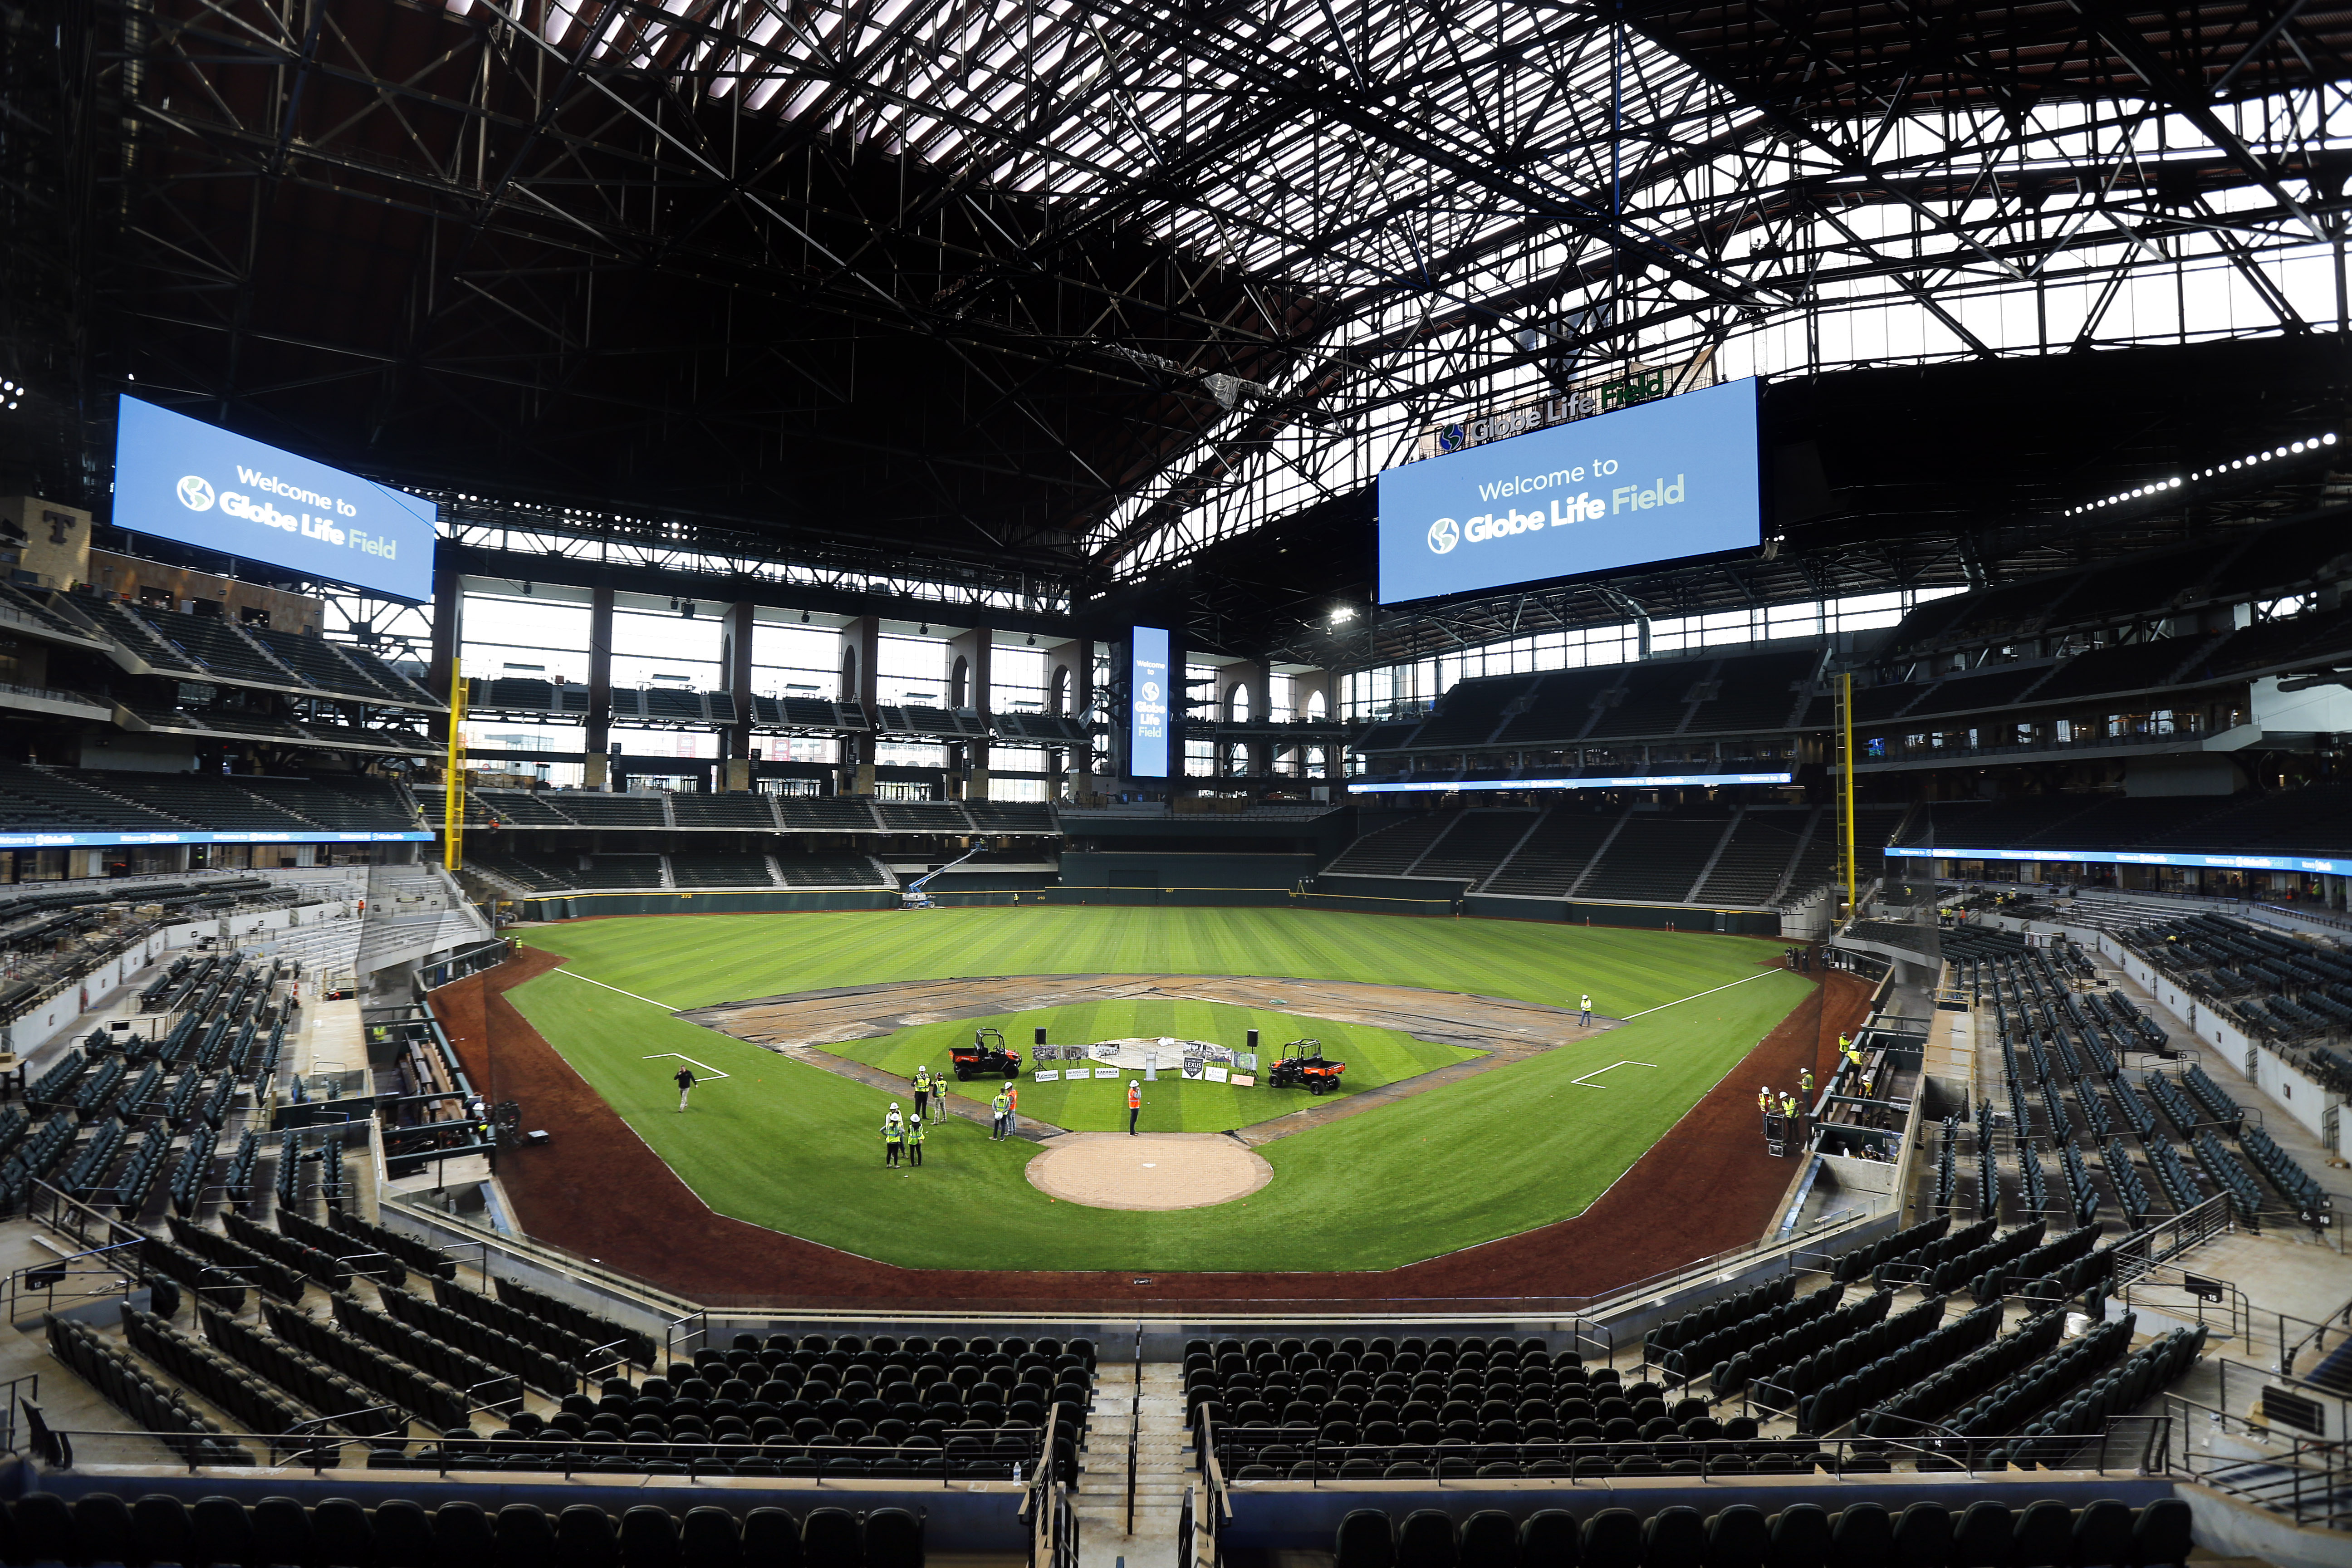 Globe Life Field may provide Rangers with bigger advantage in 2020